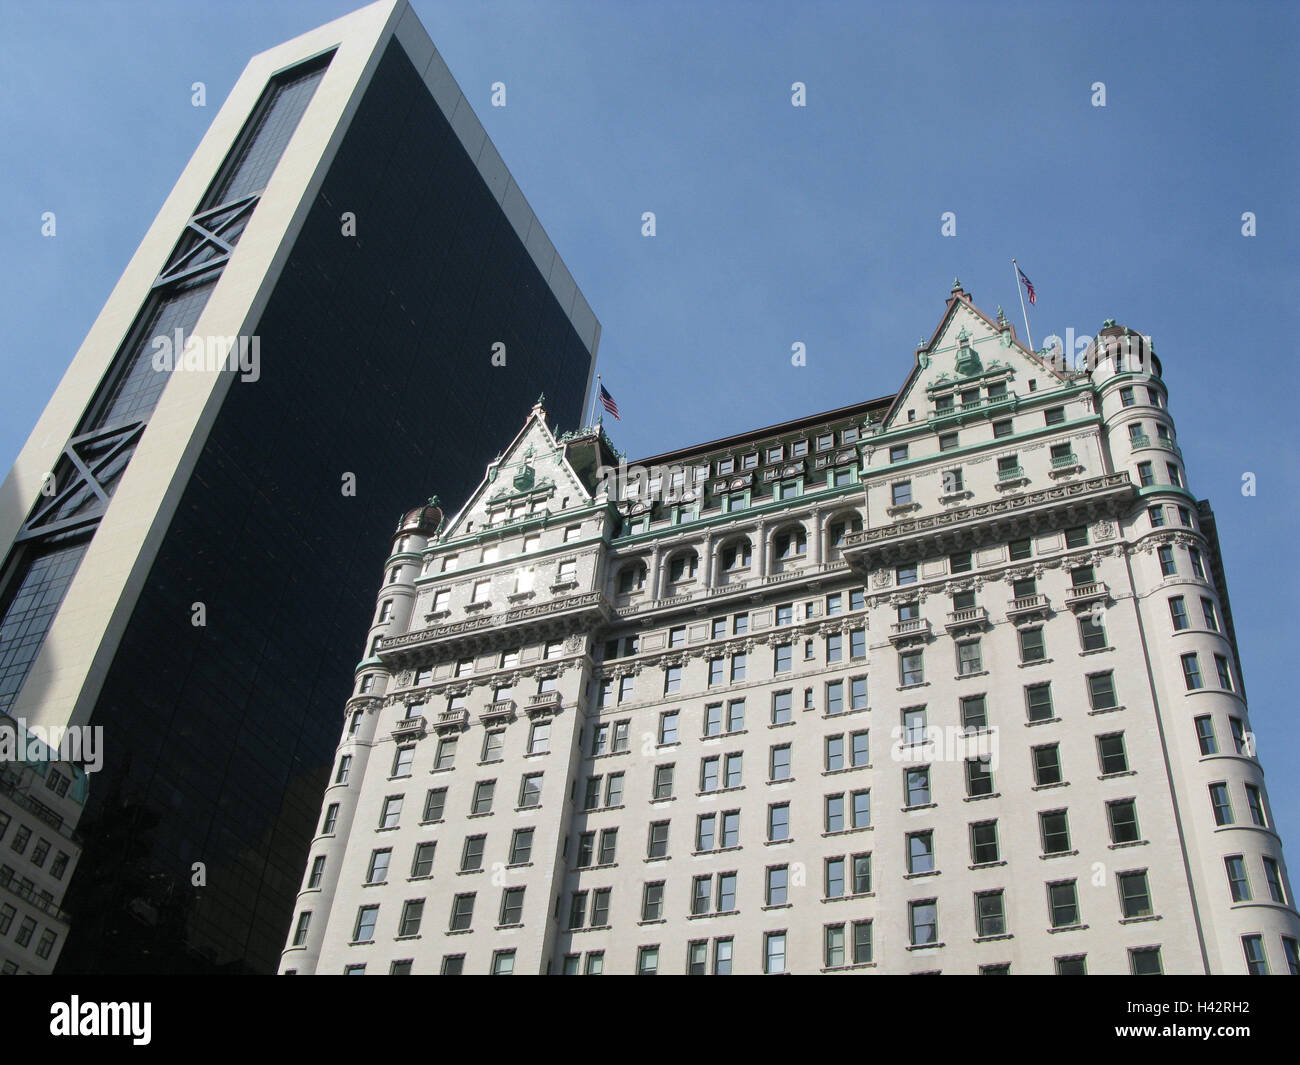 The USA, New York city, Manhattan, plaza Hotel, Facade, High rise, Detail, North America, town, destination, building, structure, hotel business, architecture, hotel building, five-star hotel, luxury, high-class hotel, nobly, steeped in tradition, outside, architectural style, new Gothic, modern, Stock Photo